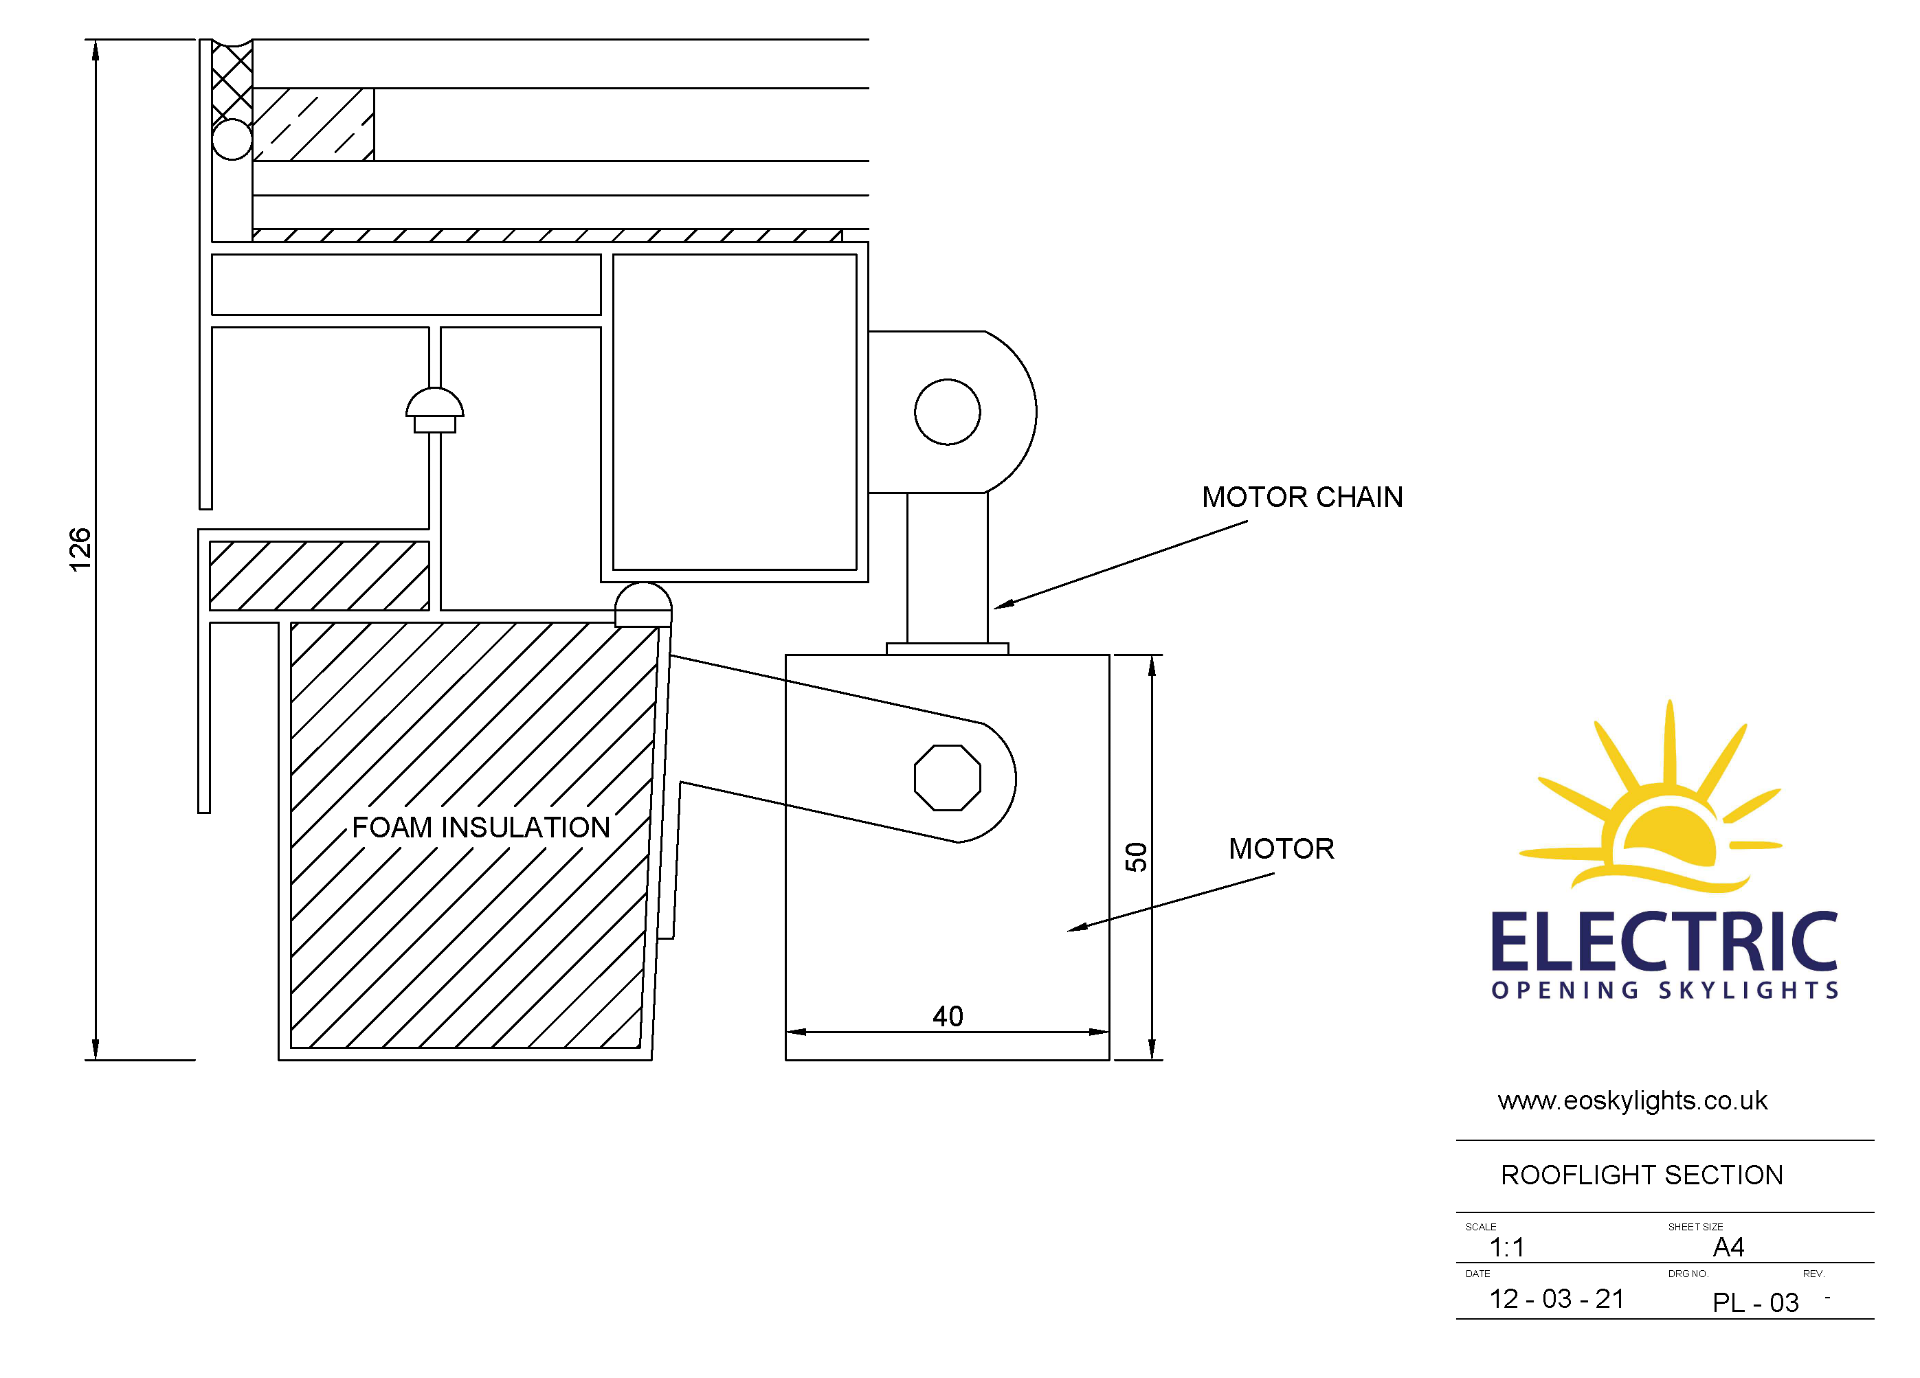 Panoroof (EOS) Electric Opening Skylight 1000x1000mm - Aluminiun Frame Double Glazed Laminated - Image 4 of 6